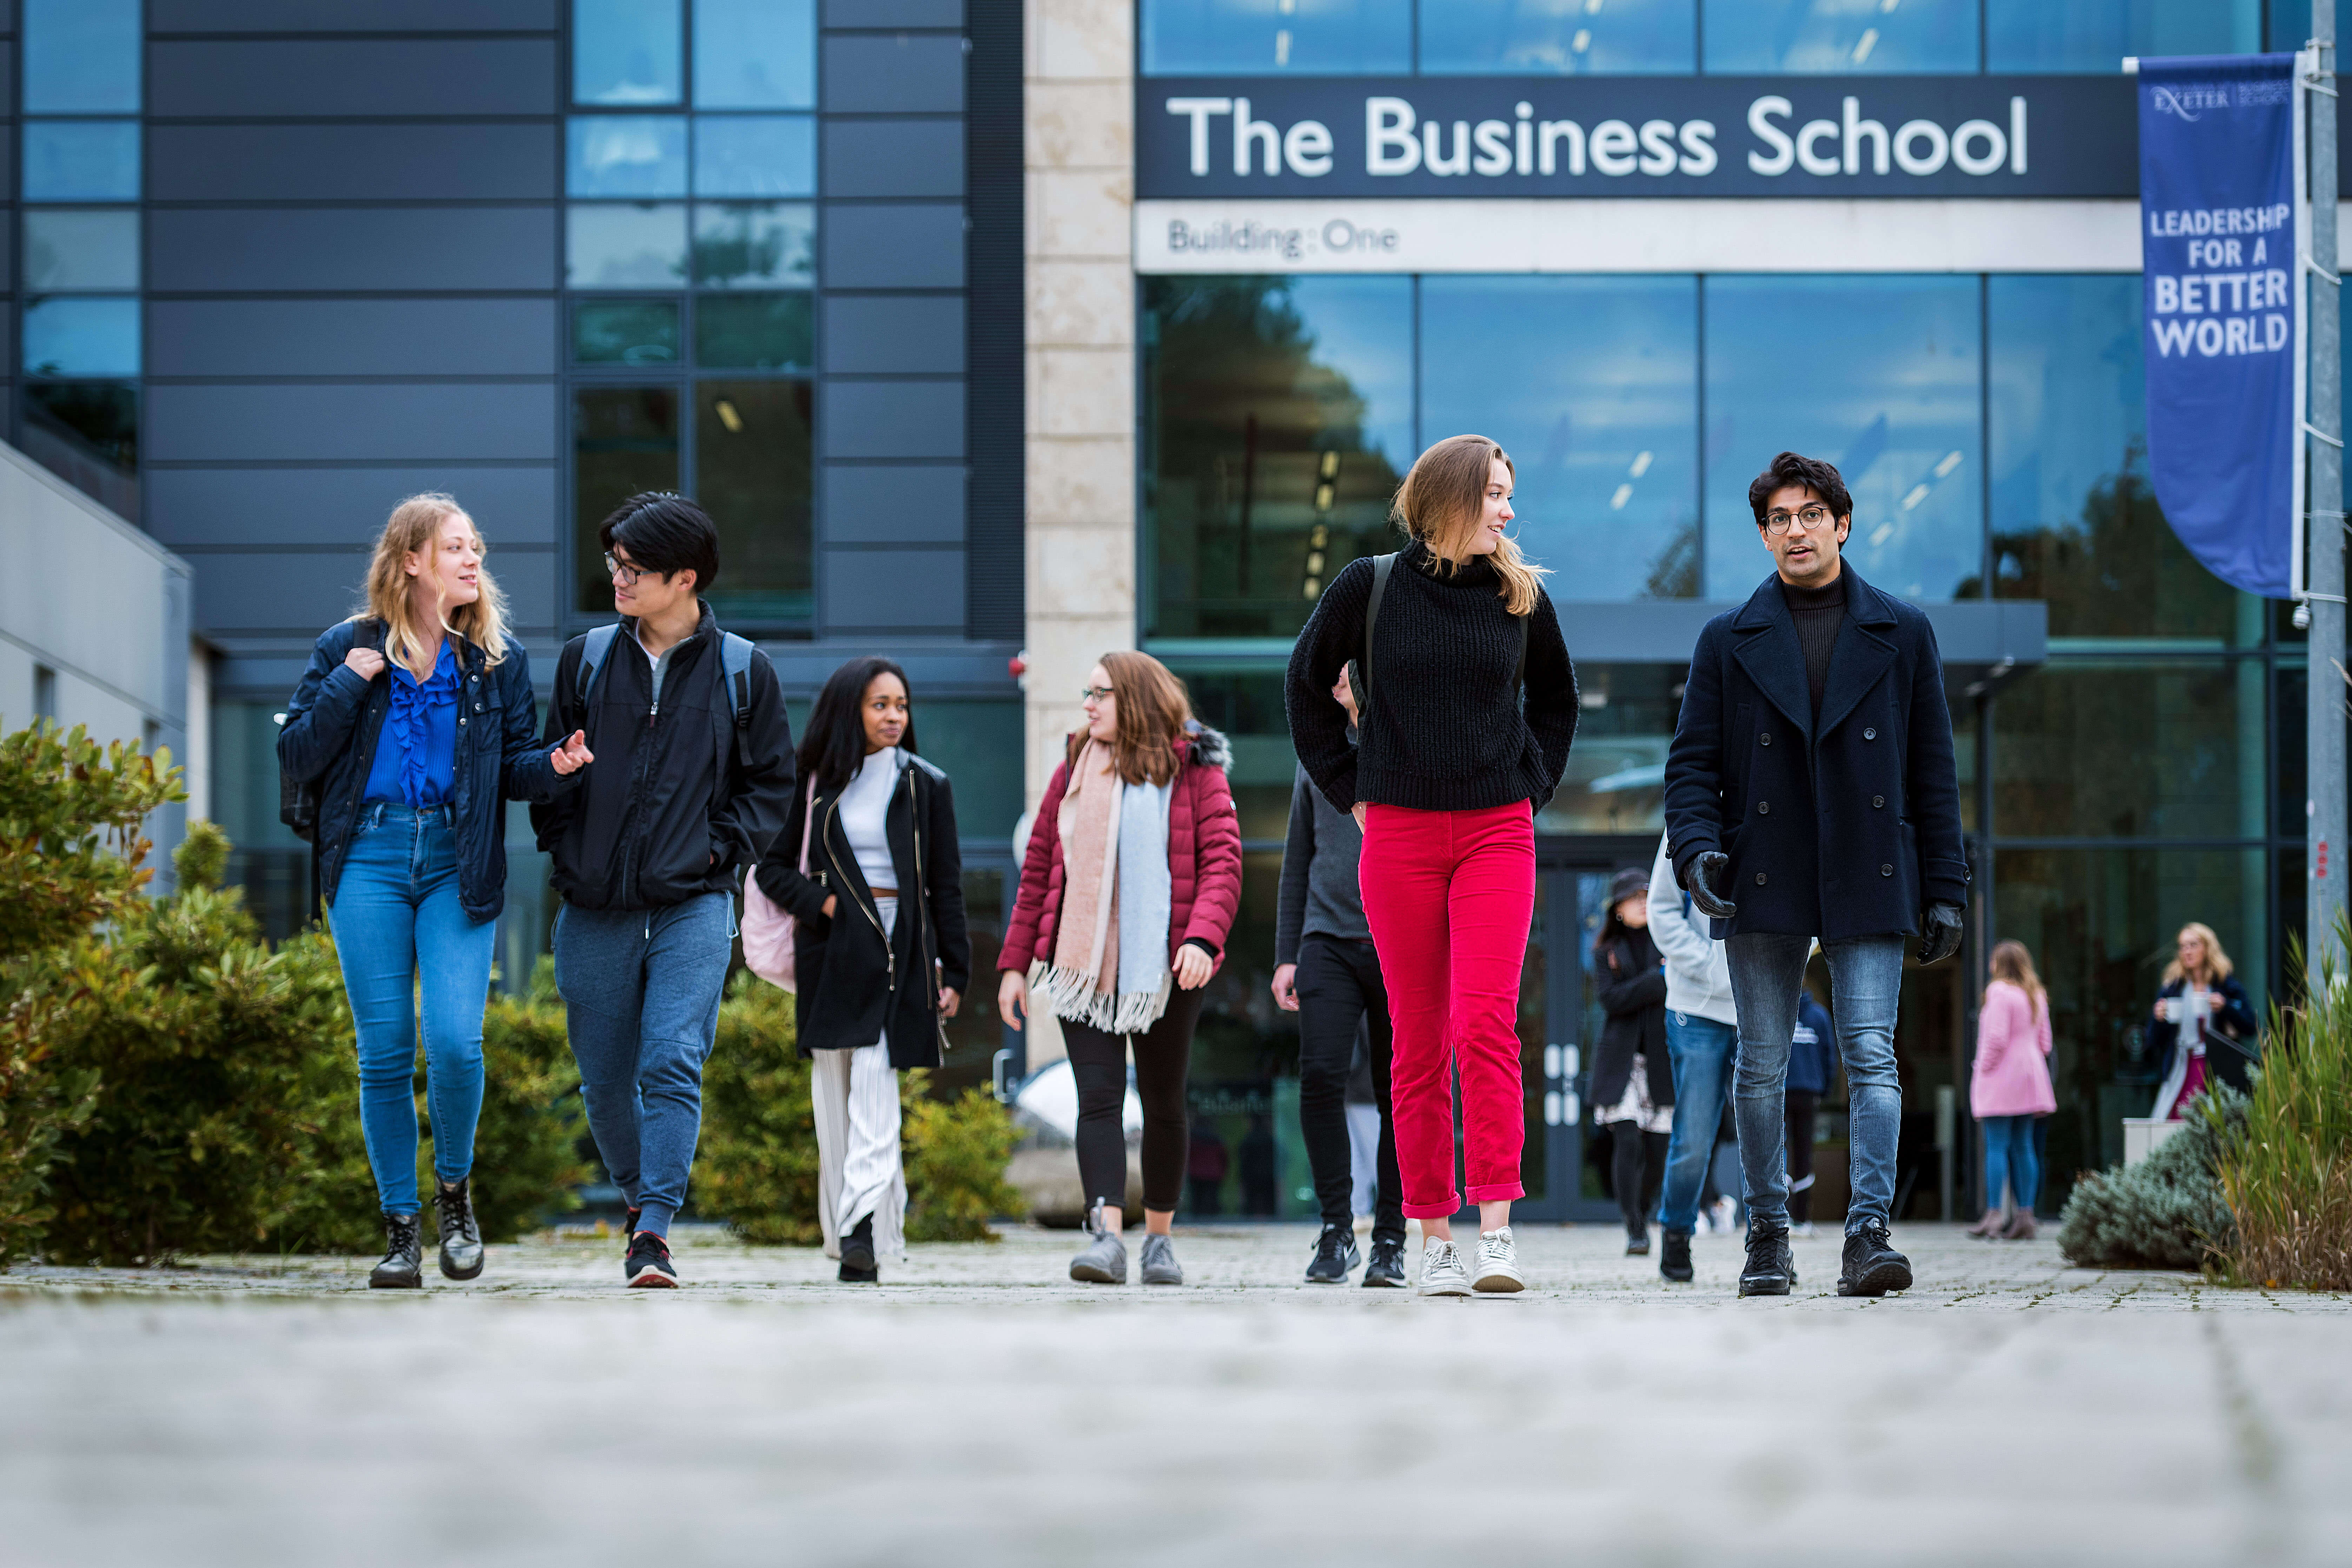 University of Exeter: Preparing business graduates for the Fourth Industrial Revolution